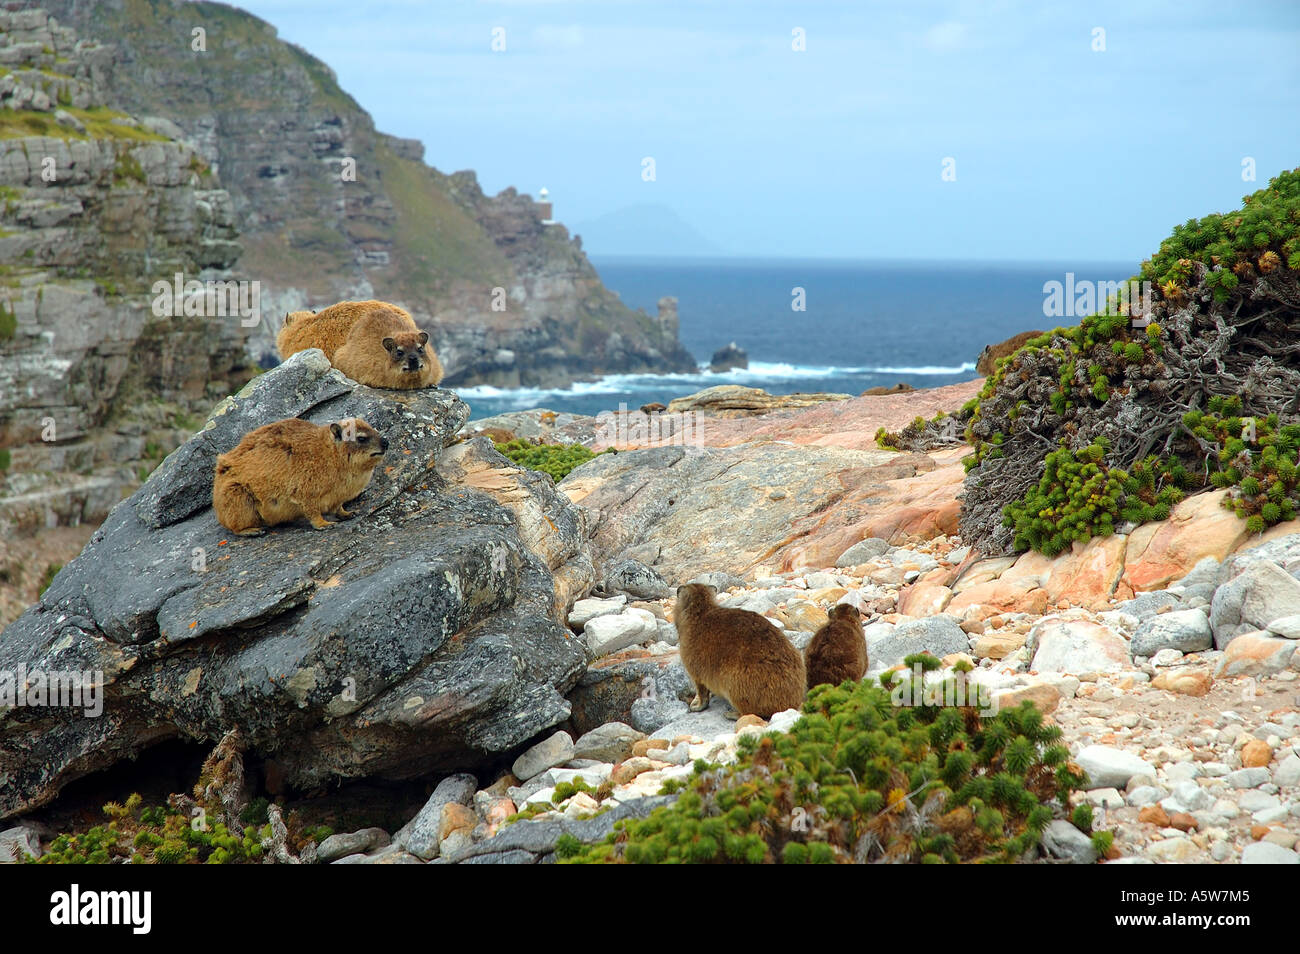 Rock hyrax or dassie Procavia capensis family group Cape of Good Hope Table Mountain National Park South Africa Stock Photo